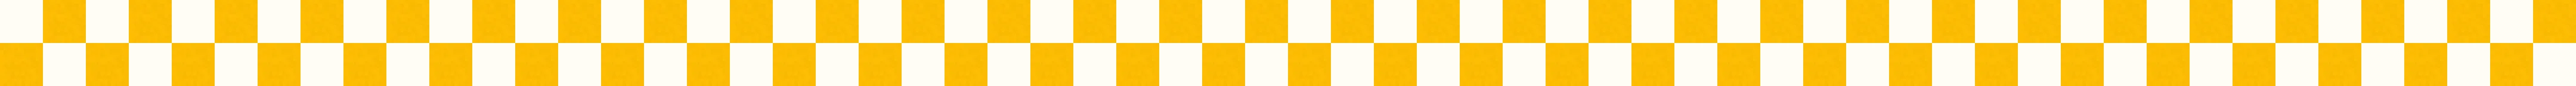 Alternating yellow and clear squares for vibes.